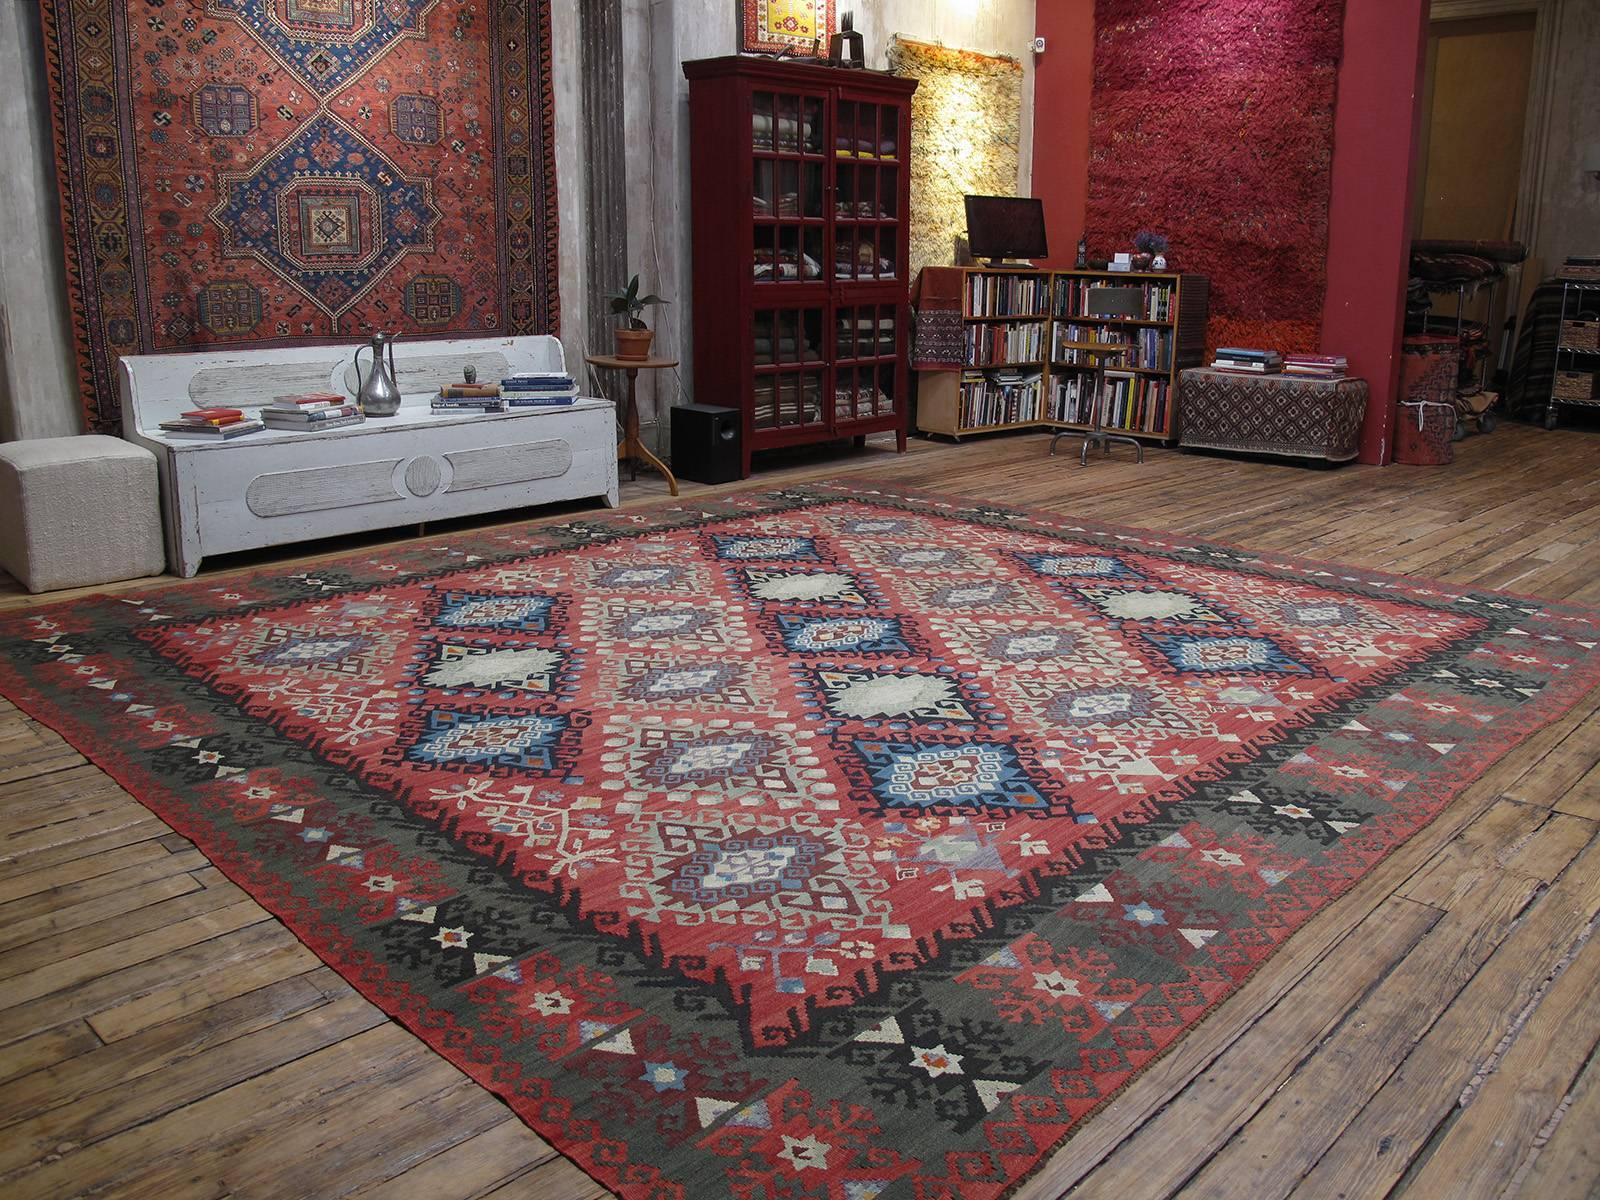 A beautiful old Kilim from the Balkans, possibly Bulgaria, of large proportions, featuring a variety of well-known Turkish Kilim motifs, in an appealing color palette. The weaving traditions in this part of Europe show the influence of the centuries